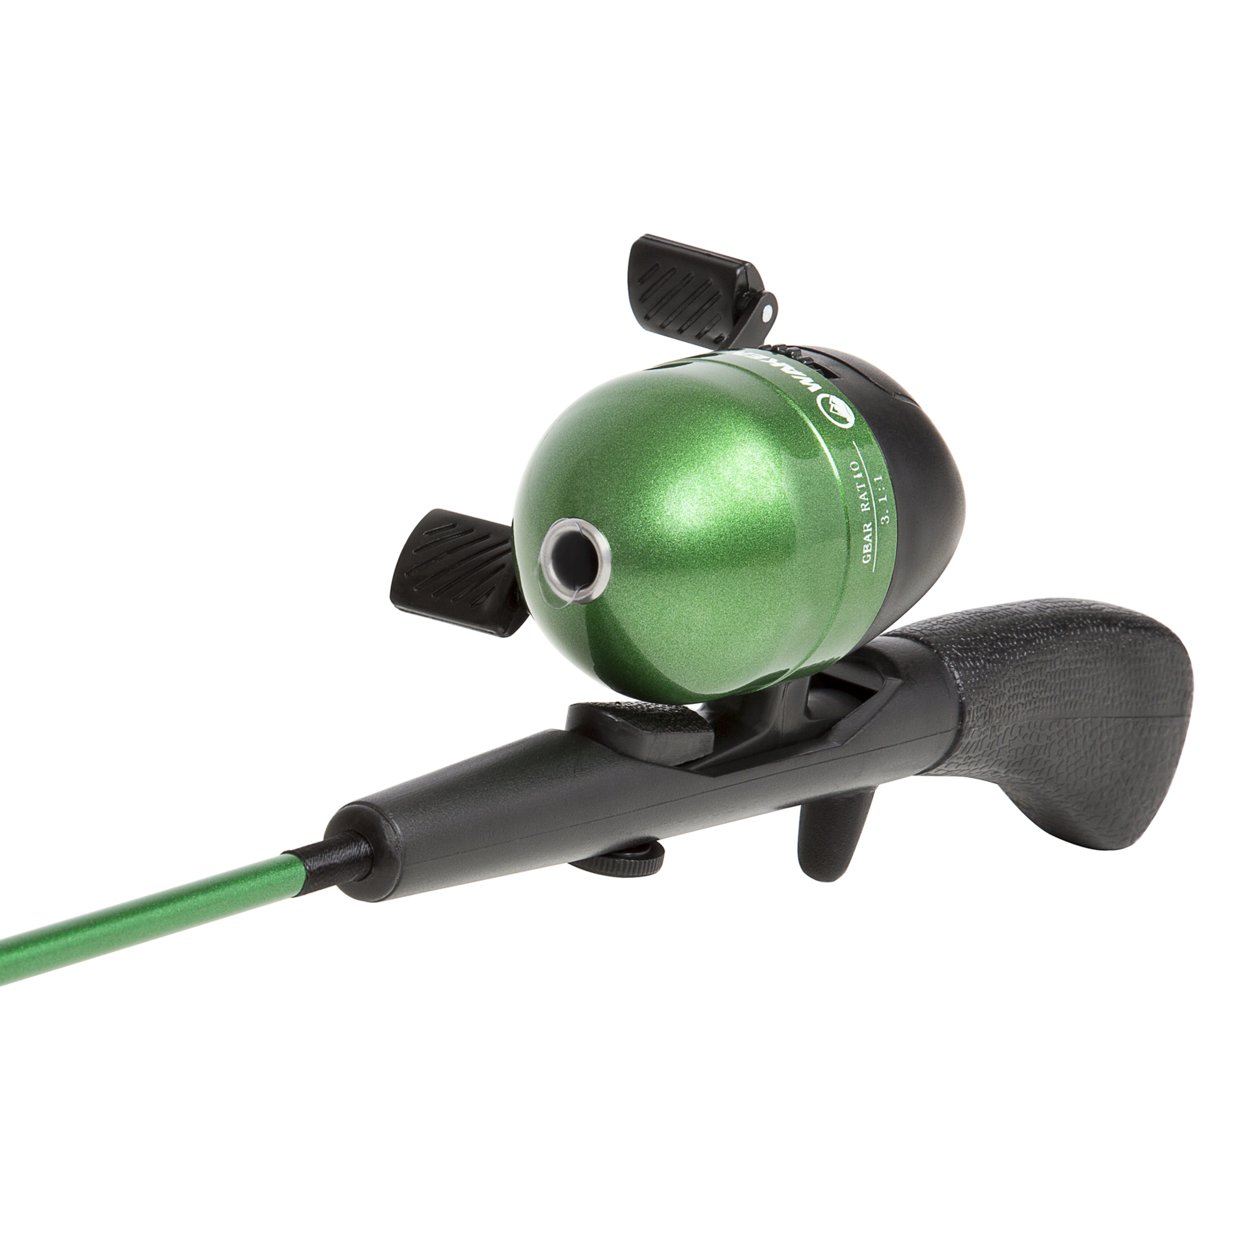 Wakeman Spawn Series Kids Spincast Combo And Tackle Set - Green